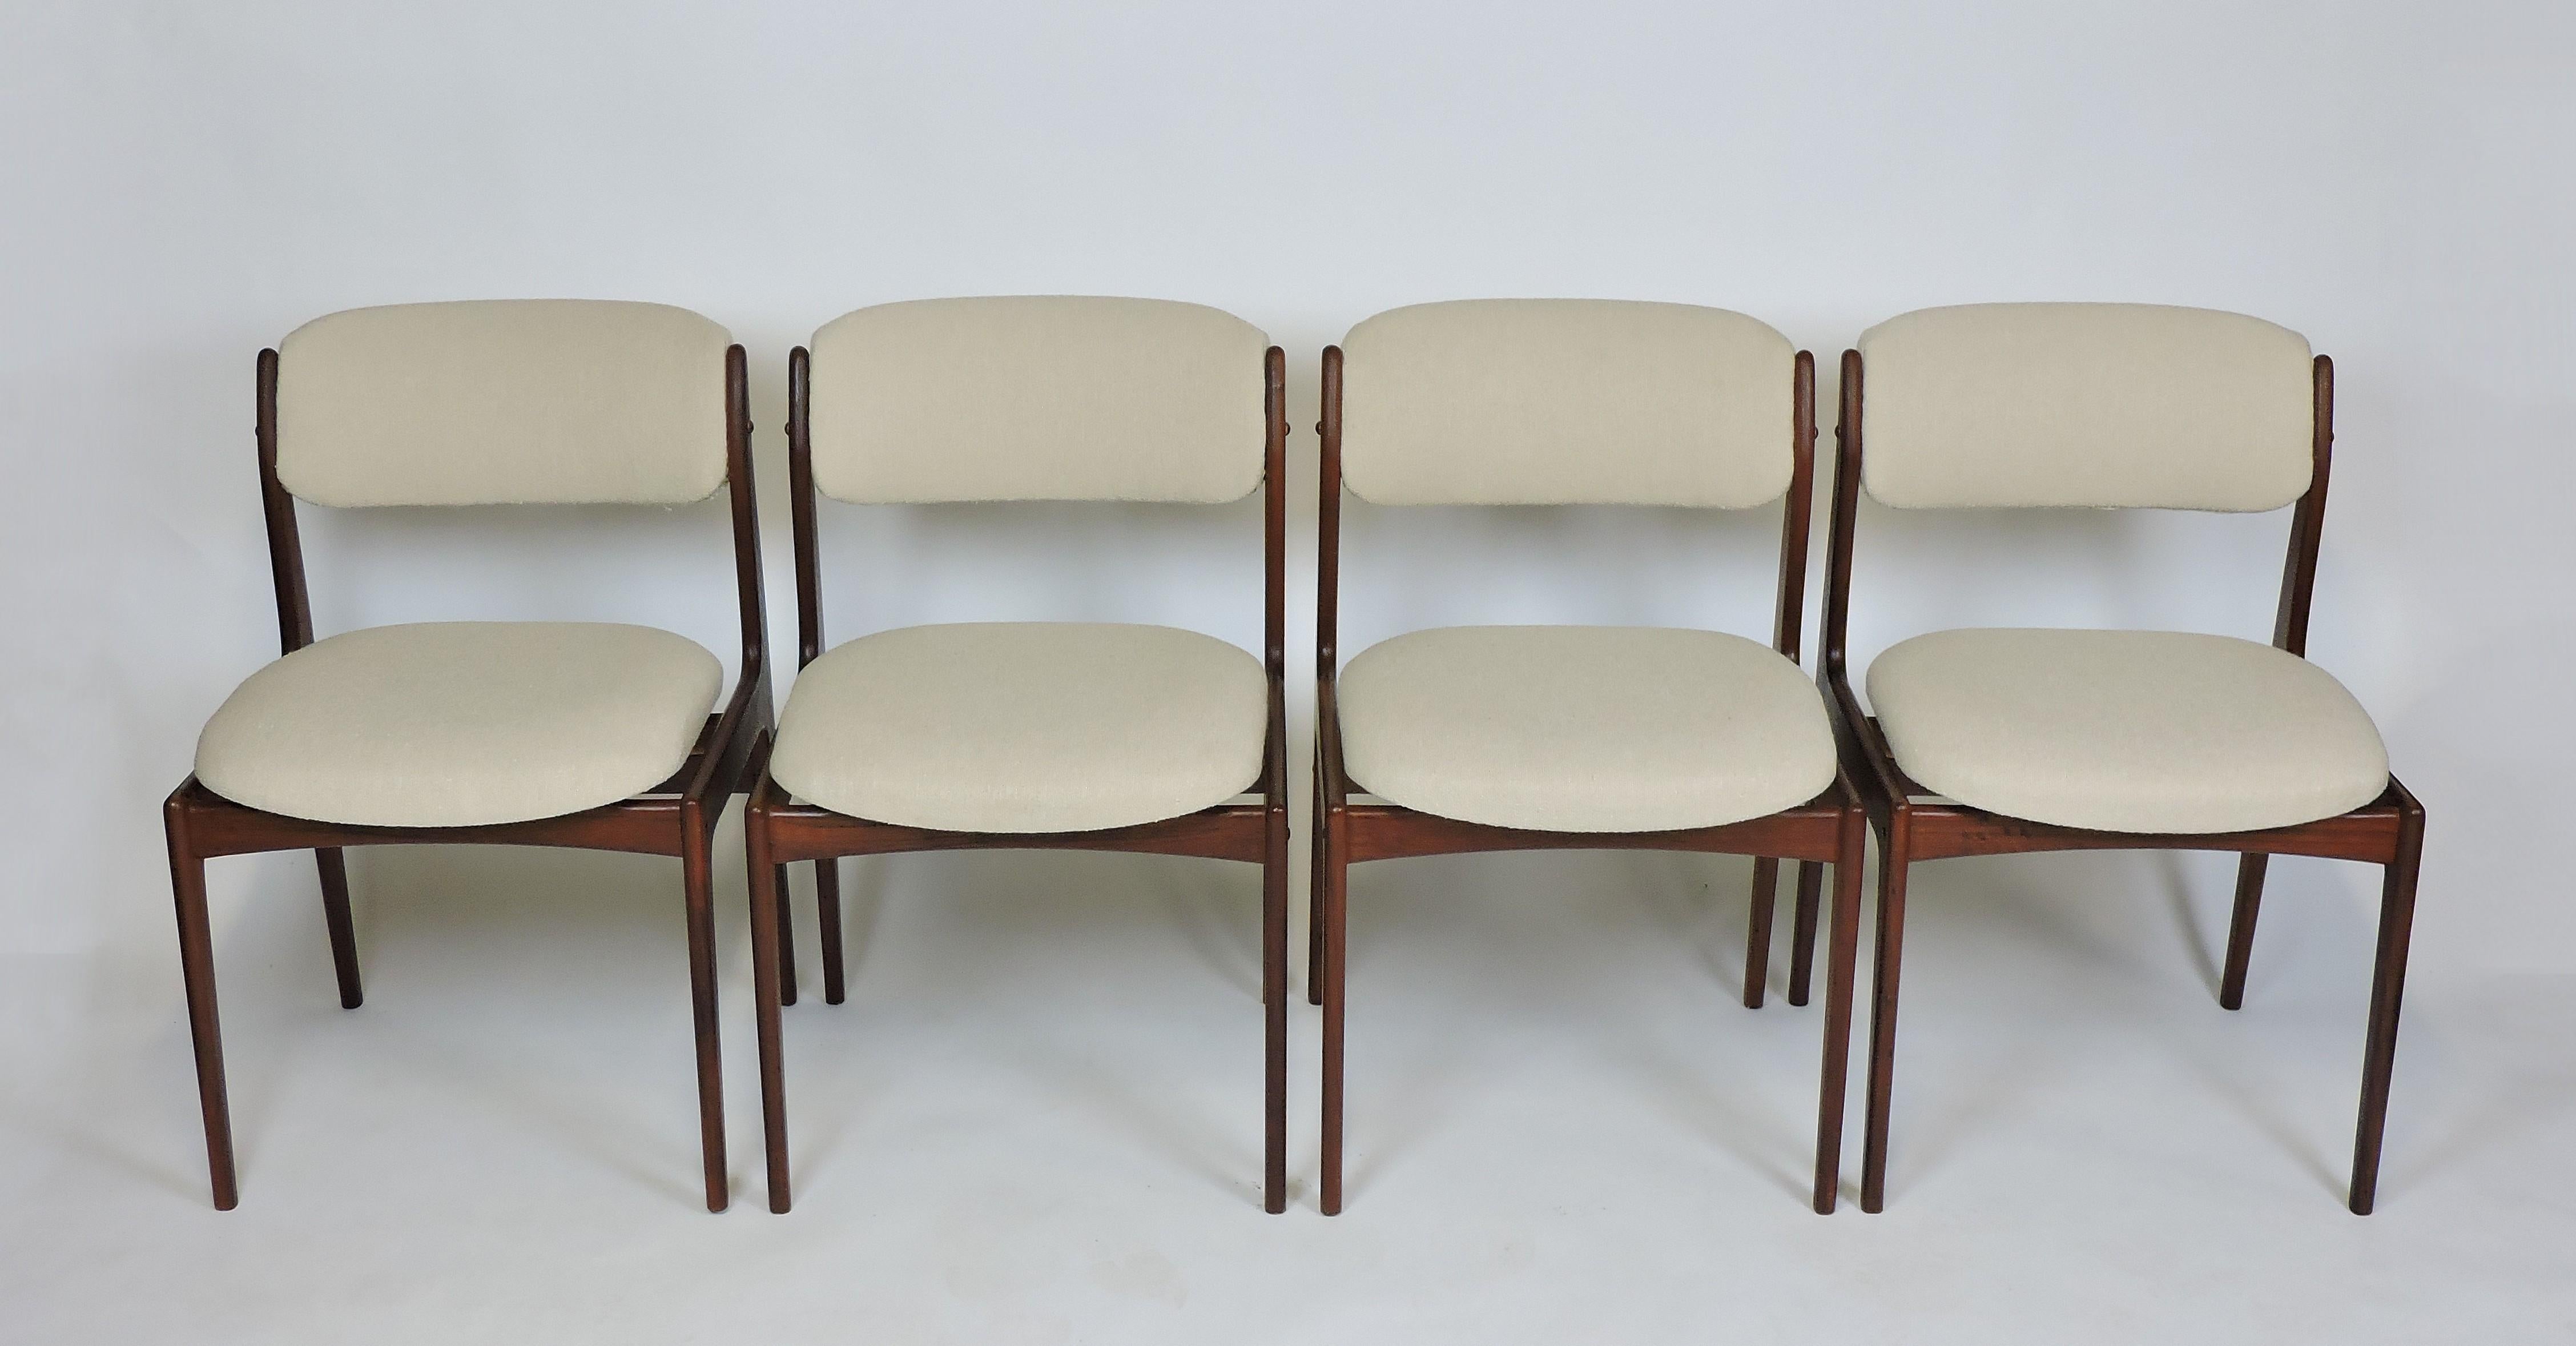 Beautiful set of four teak dining chairs in the style of Erik Buck. These chairs are made of solid teak with curved upholstered backs, floating seats and tapered legs. Newly upholstered in an off-white boucle fabric.